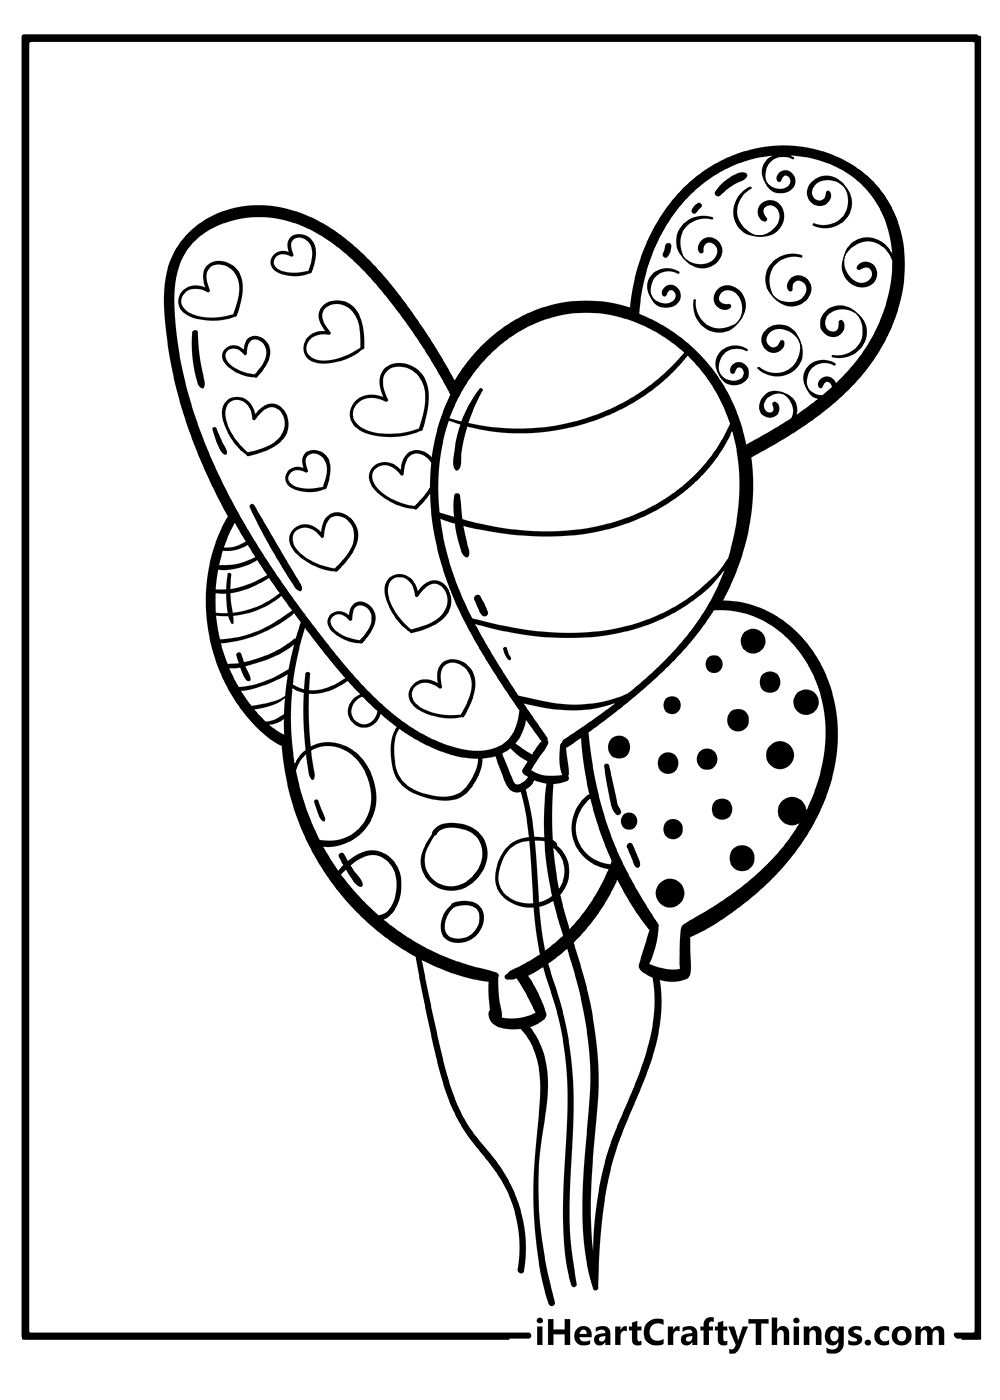 Balloons Coloring Pages for preschoolers free printable